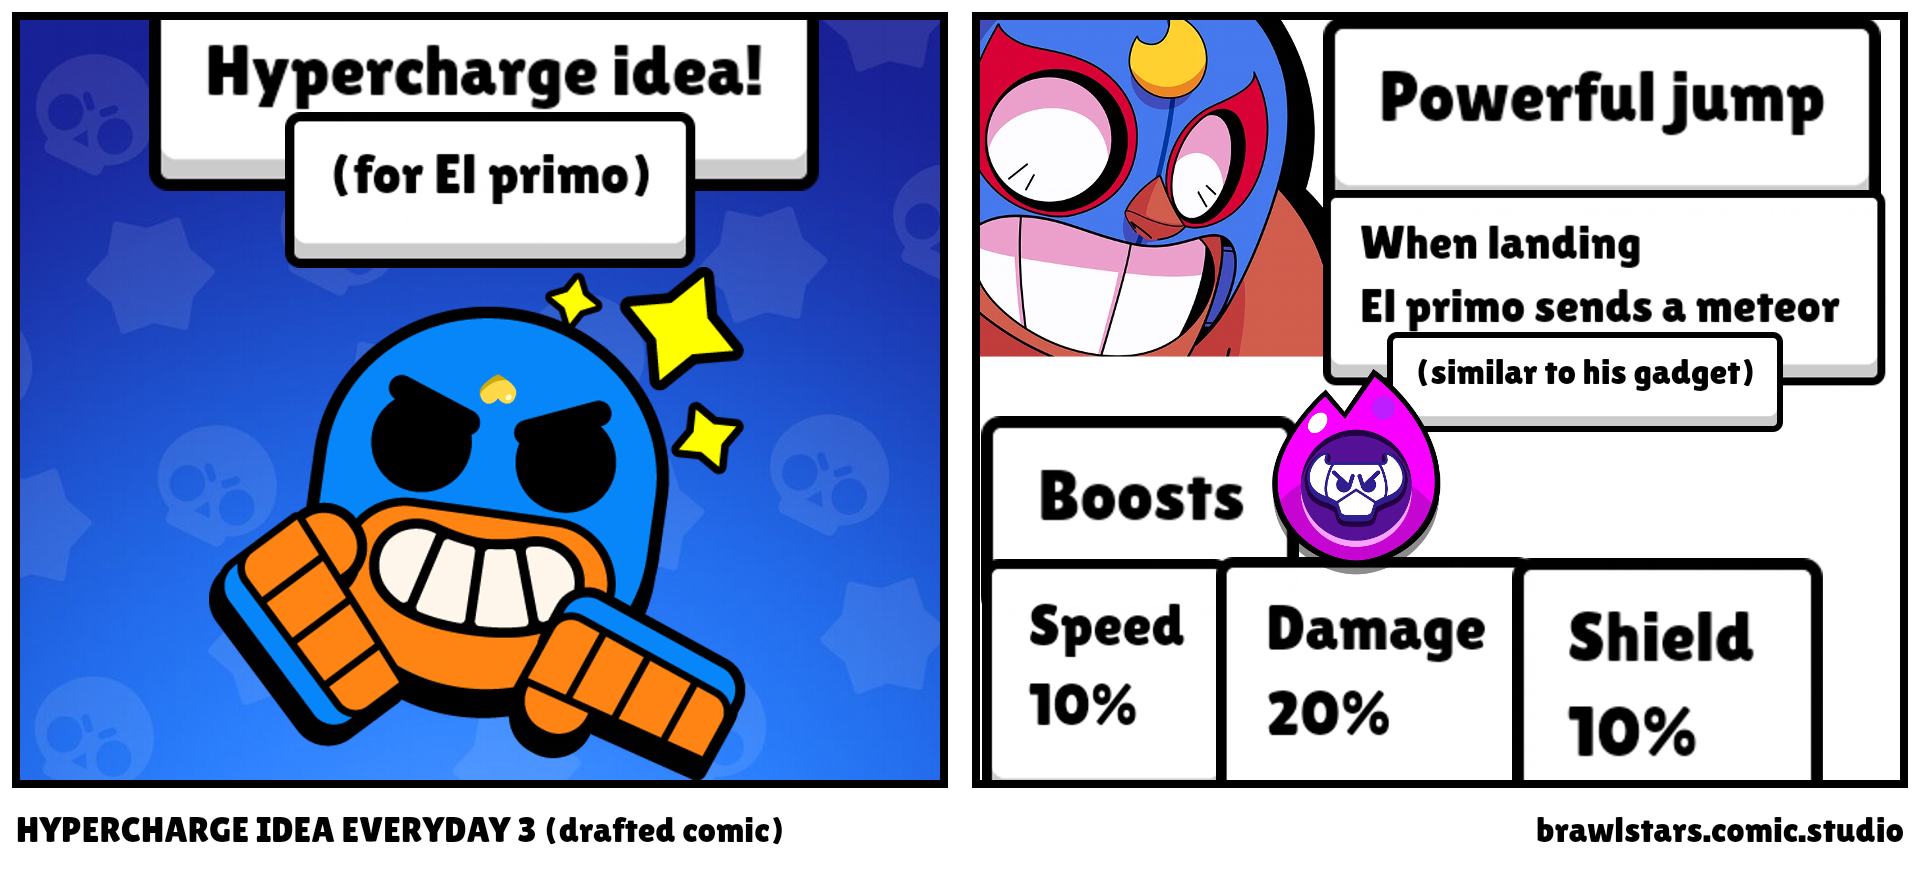 HYPERCHARGE IDEA EVERYDAY 3 (drafted comic)